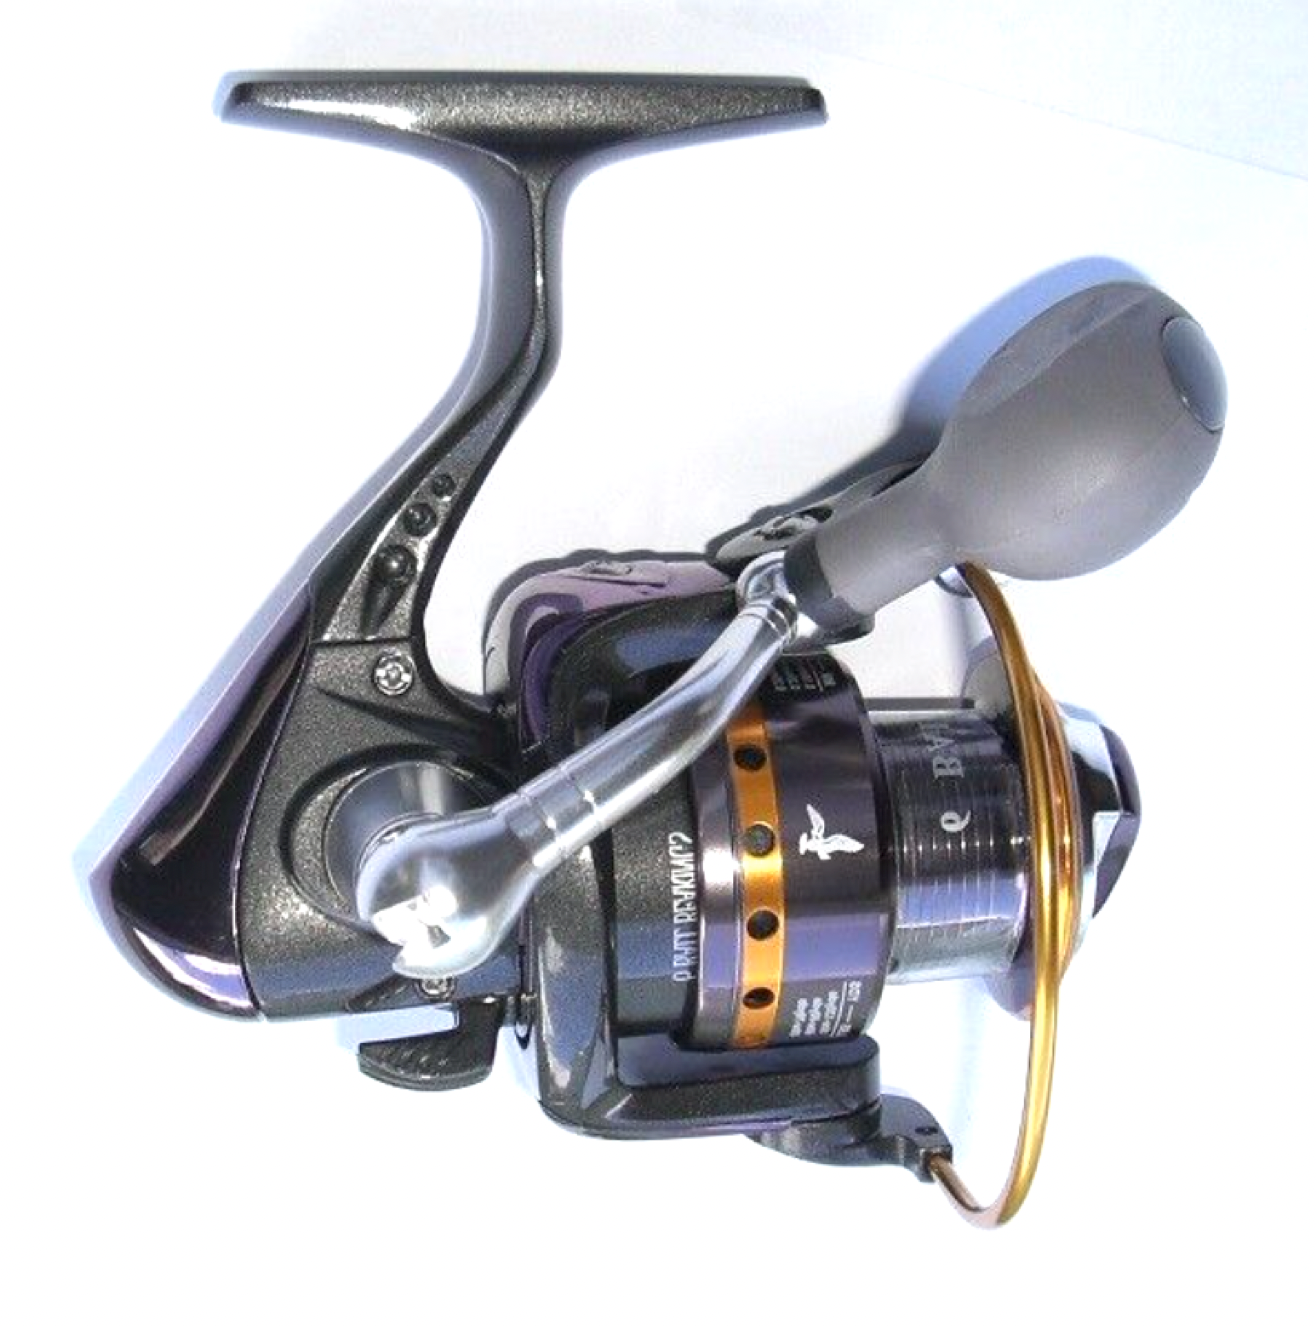  Eagle Claw TMM66S4C Trailmaster Spinning Combo 6'6 Length, 4  Pieces, Medium Power : Spinning Rod And Reel Combos : Sports & Outdoors